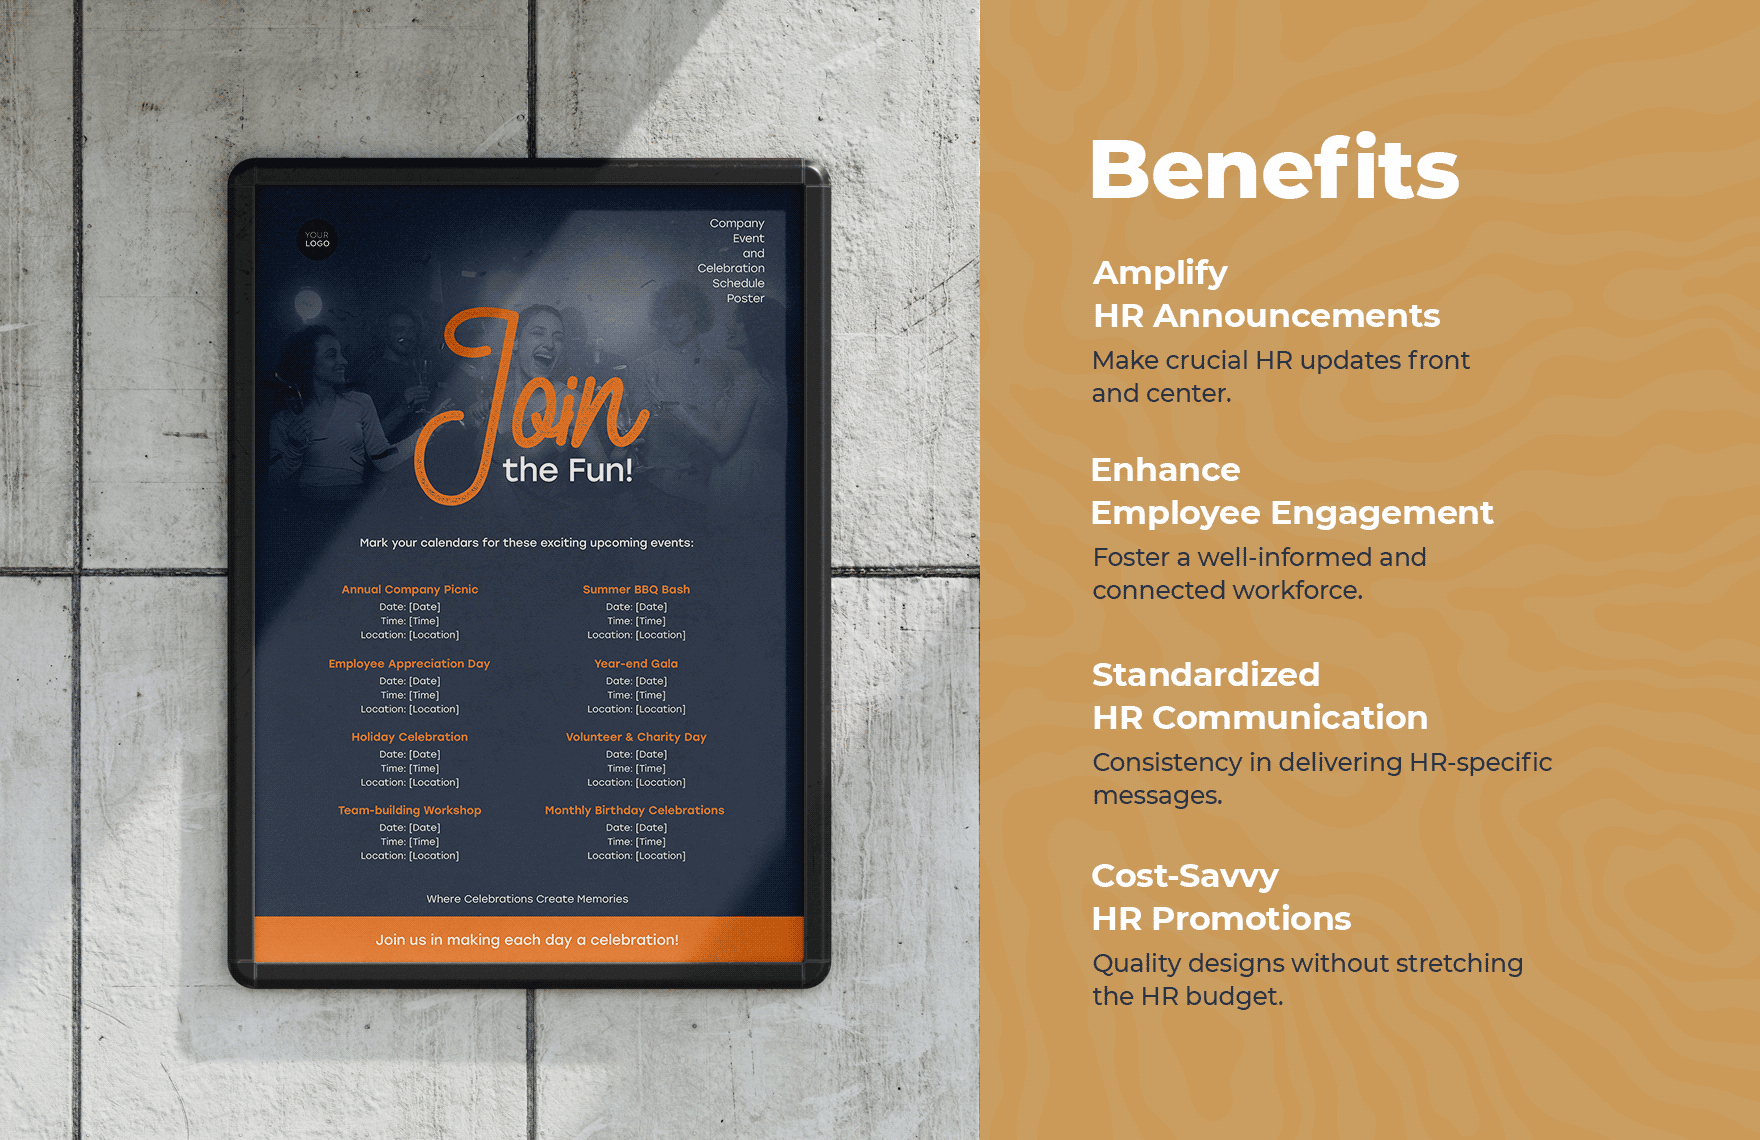 Company Event and Celebration Schedule Poster HR Template